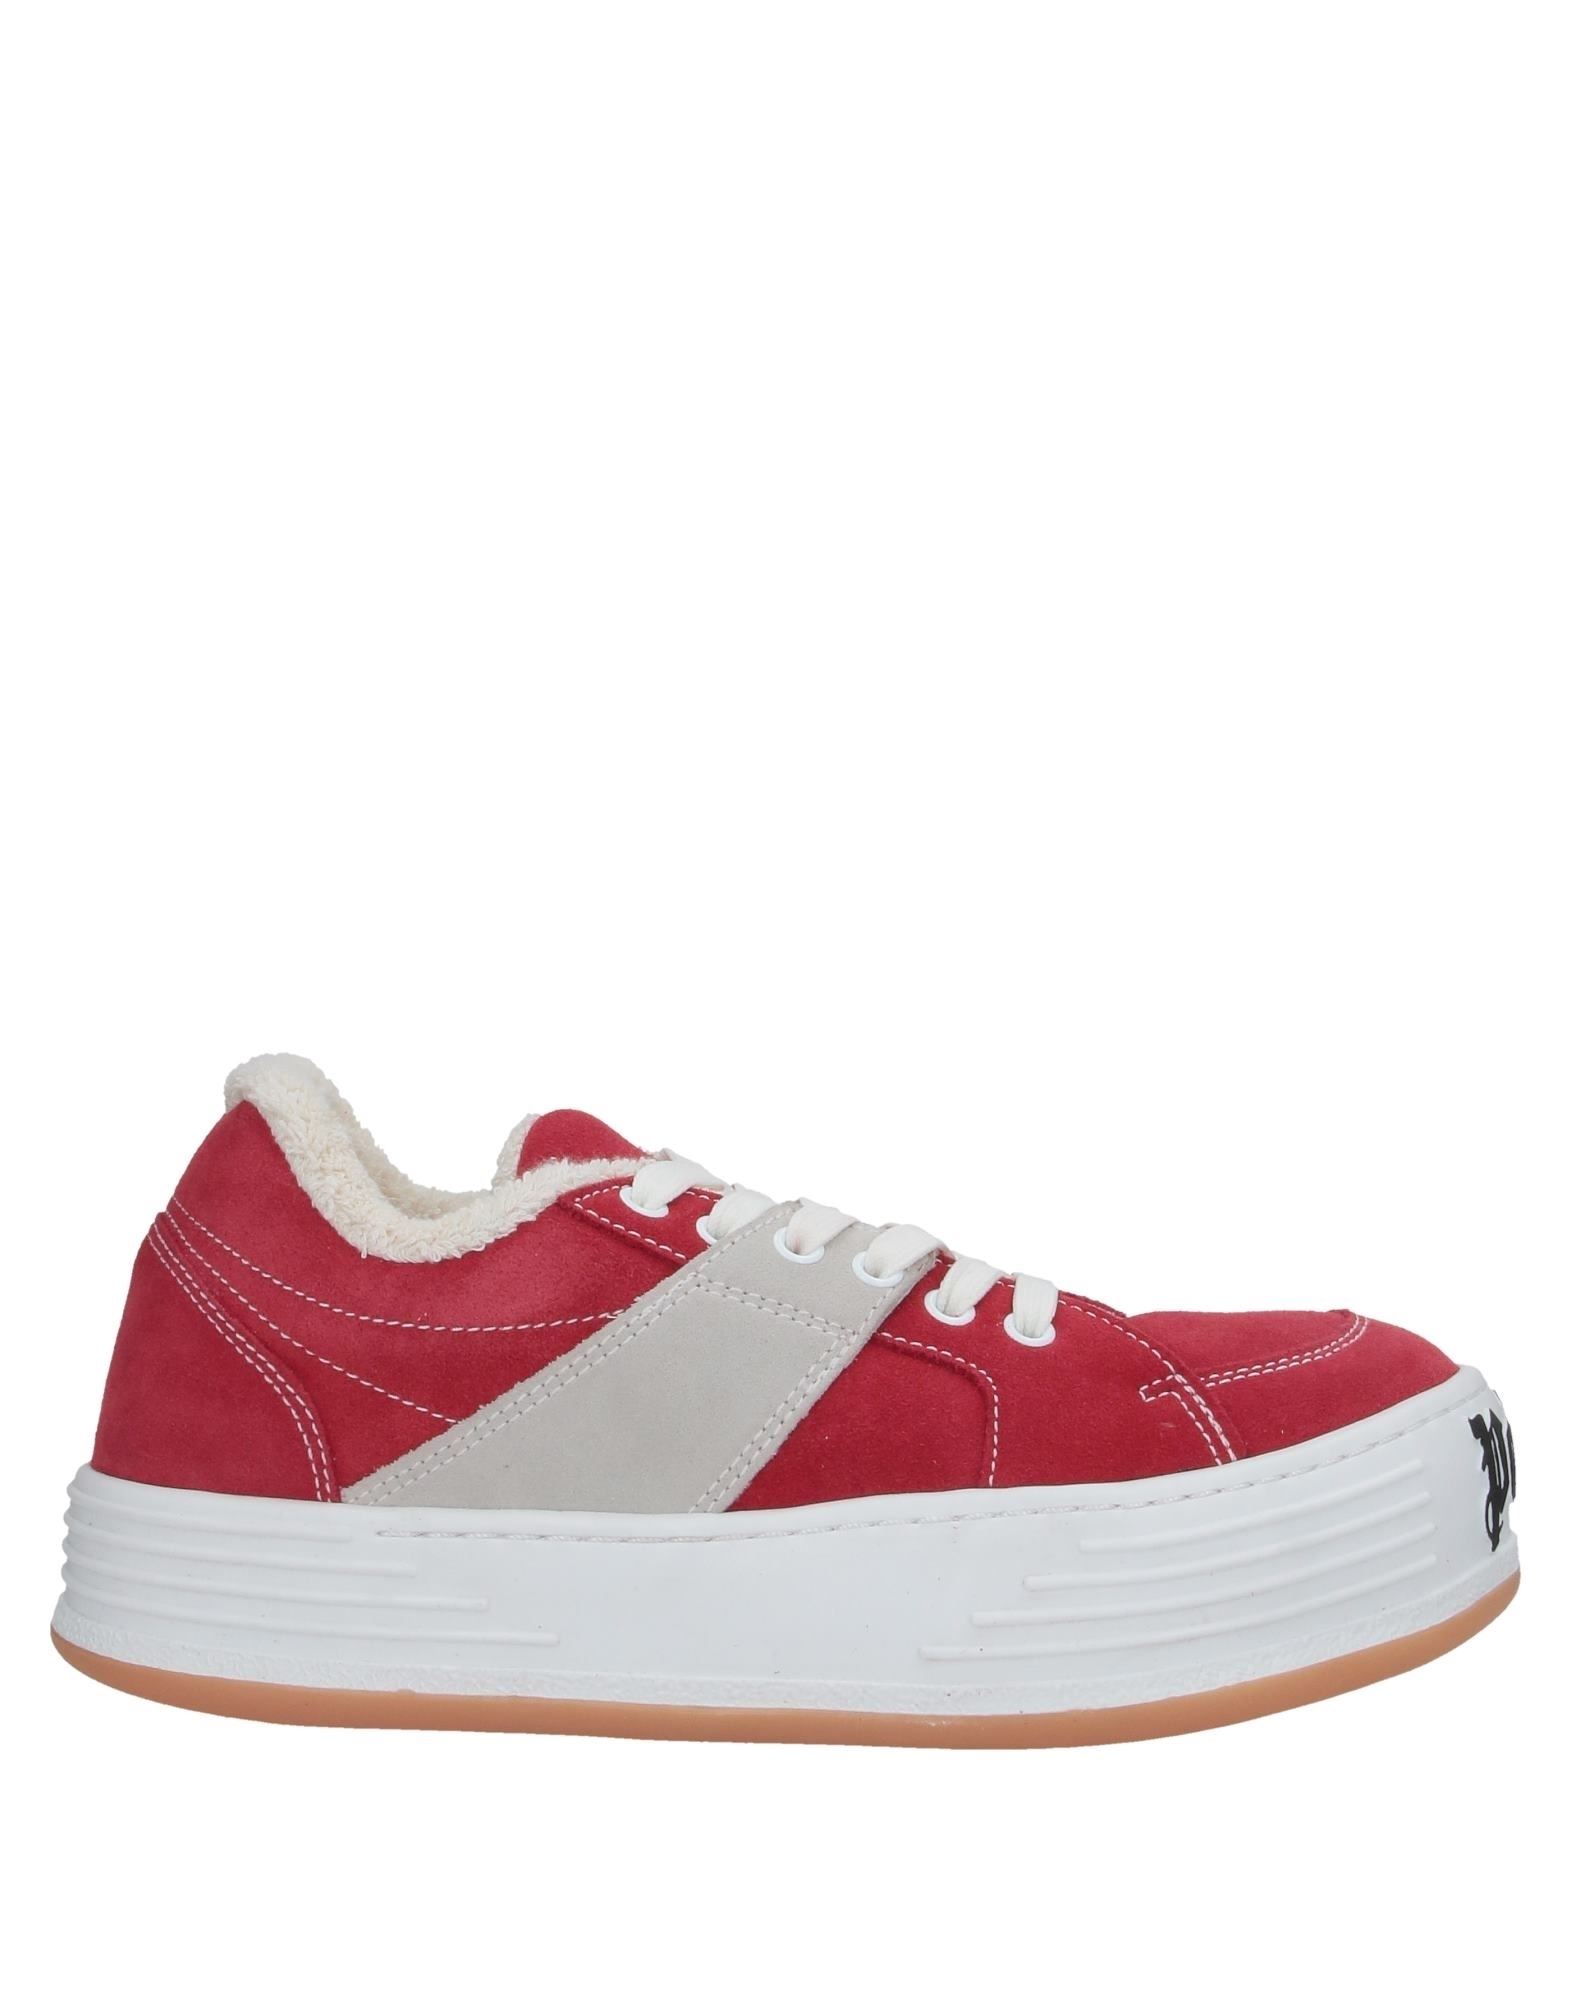 Palm Angels Sneakers In Red